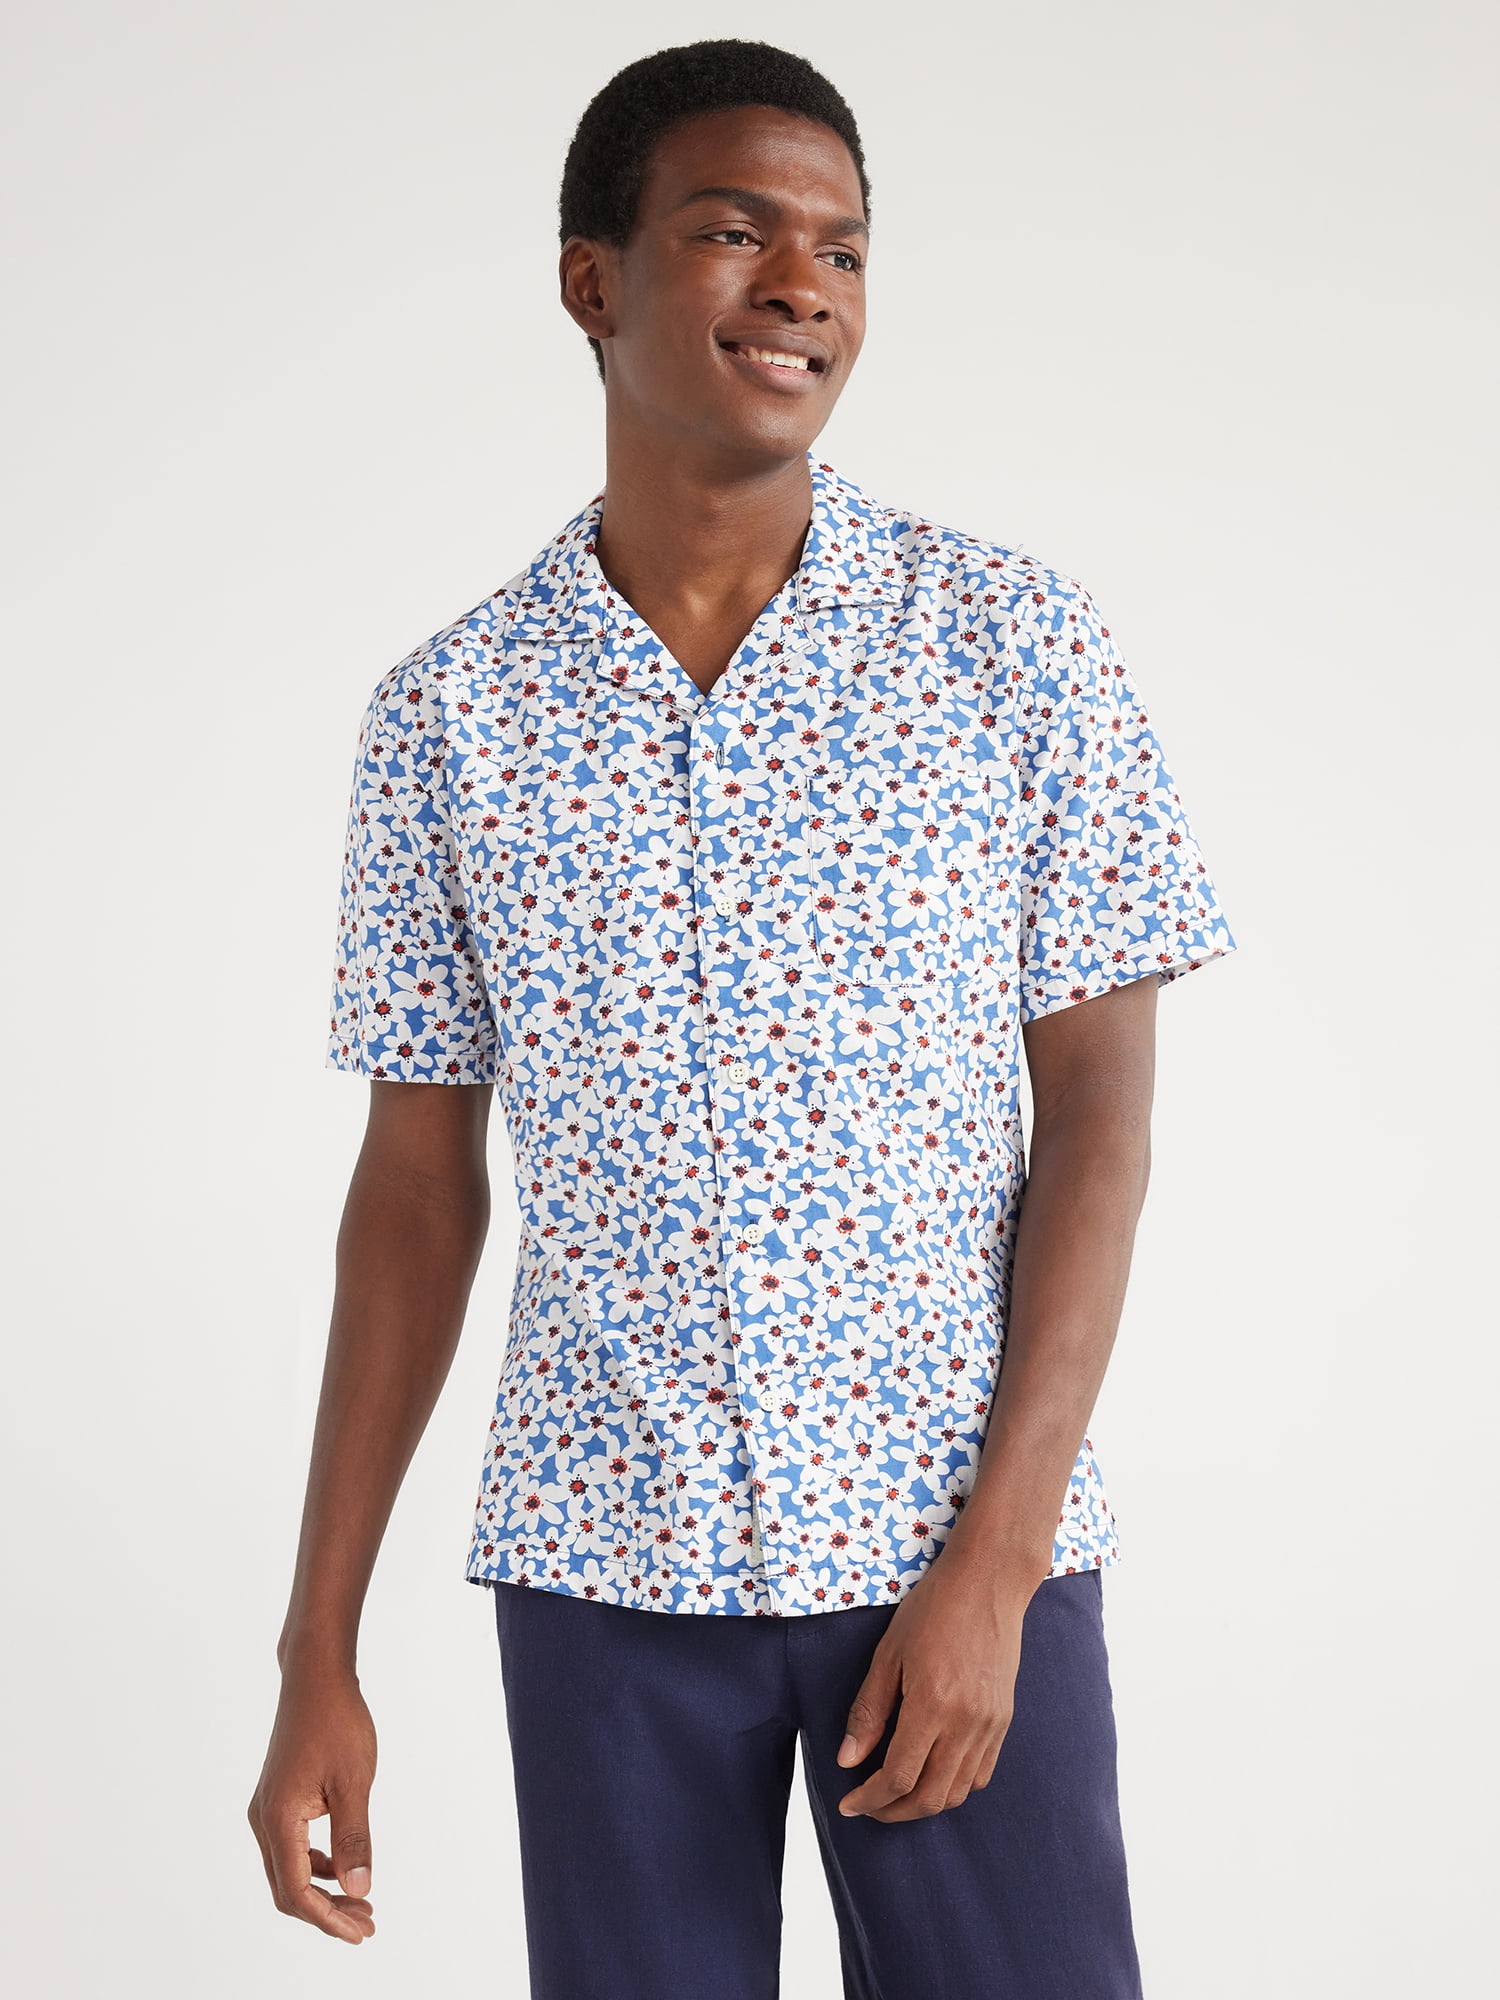 Free Assembly Men's Floral Camp Shirt with Short Sleeves, Sizes S-XXXL ...